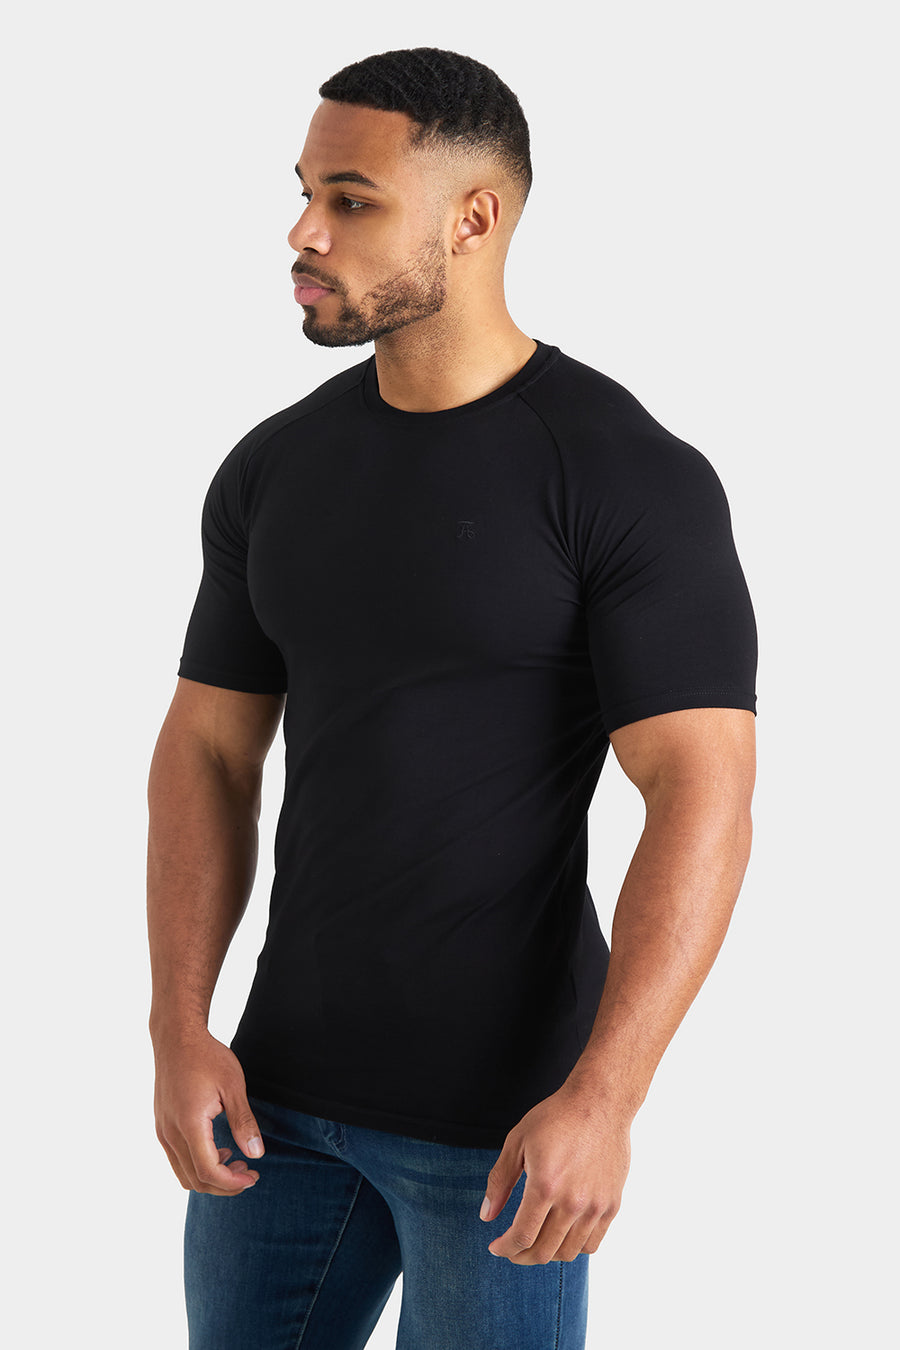 Athletic Fit Tops - TAILORED ATHLETE - USA